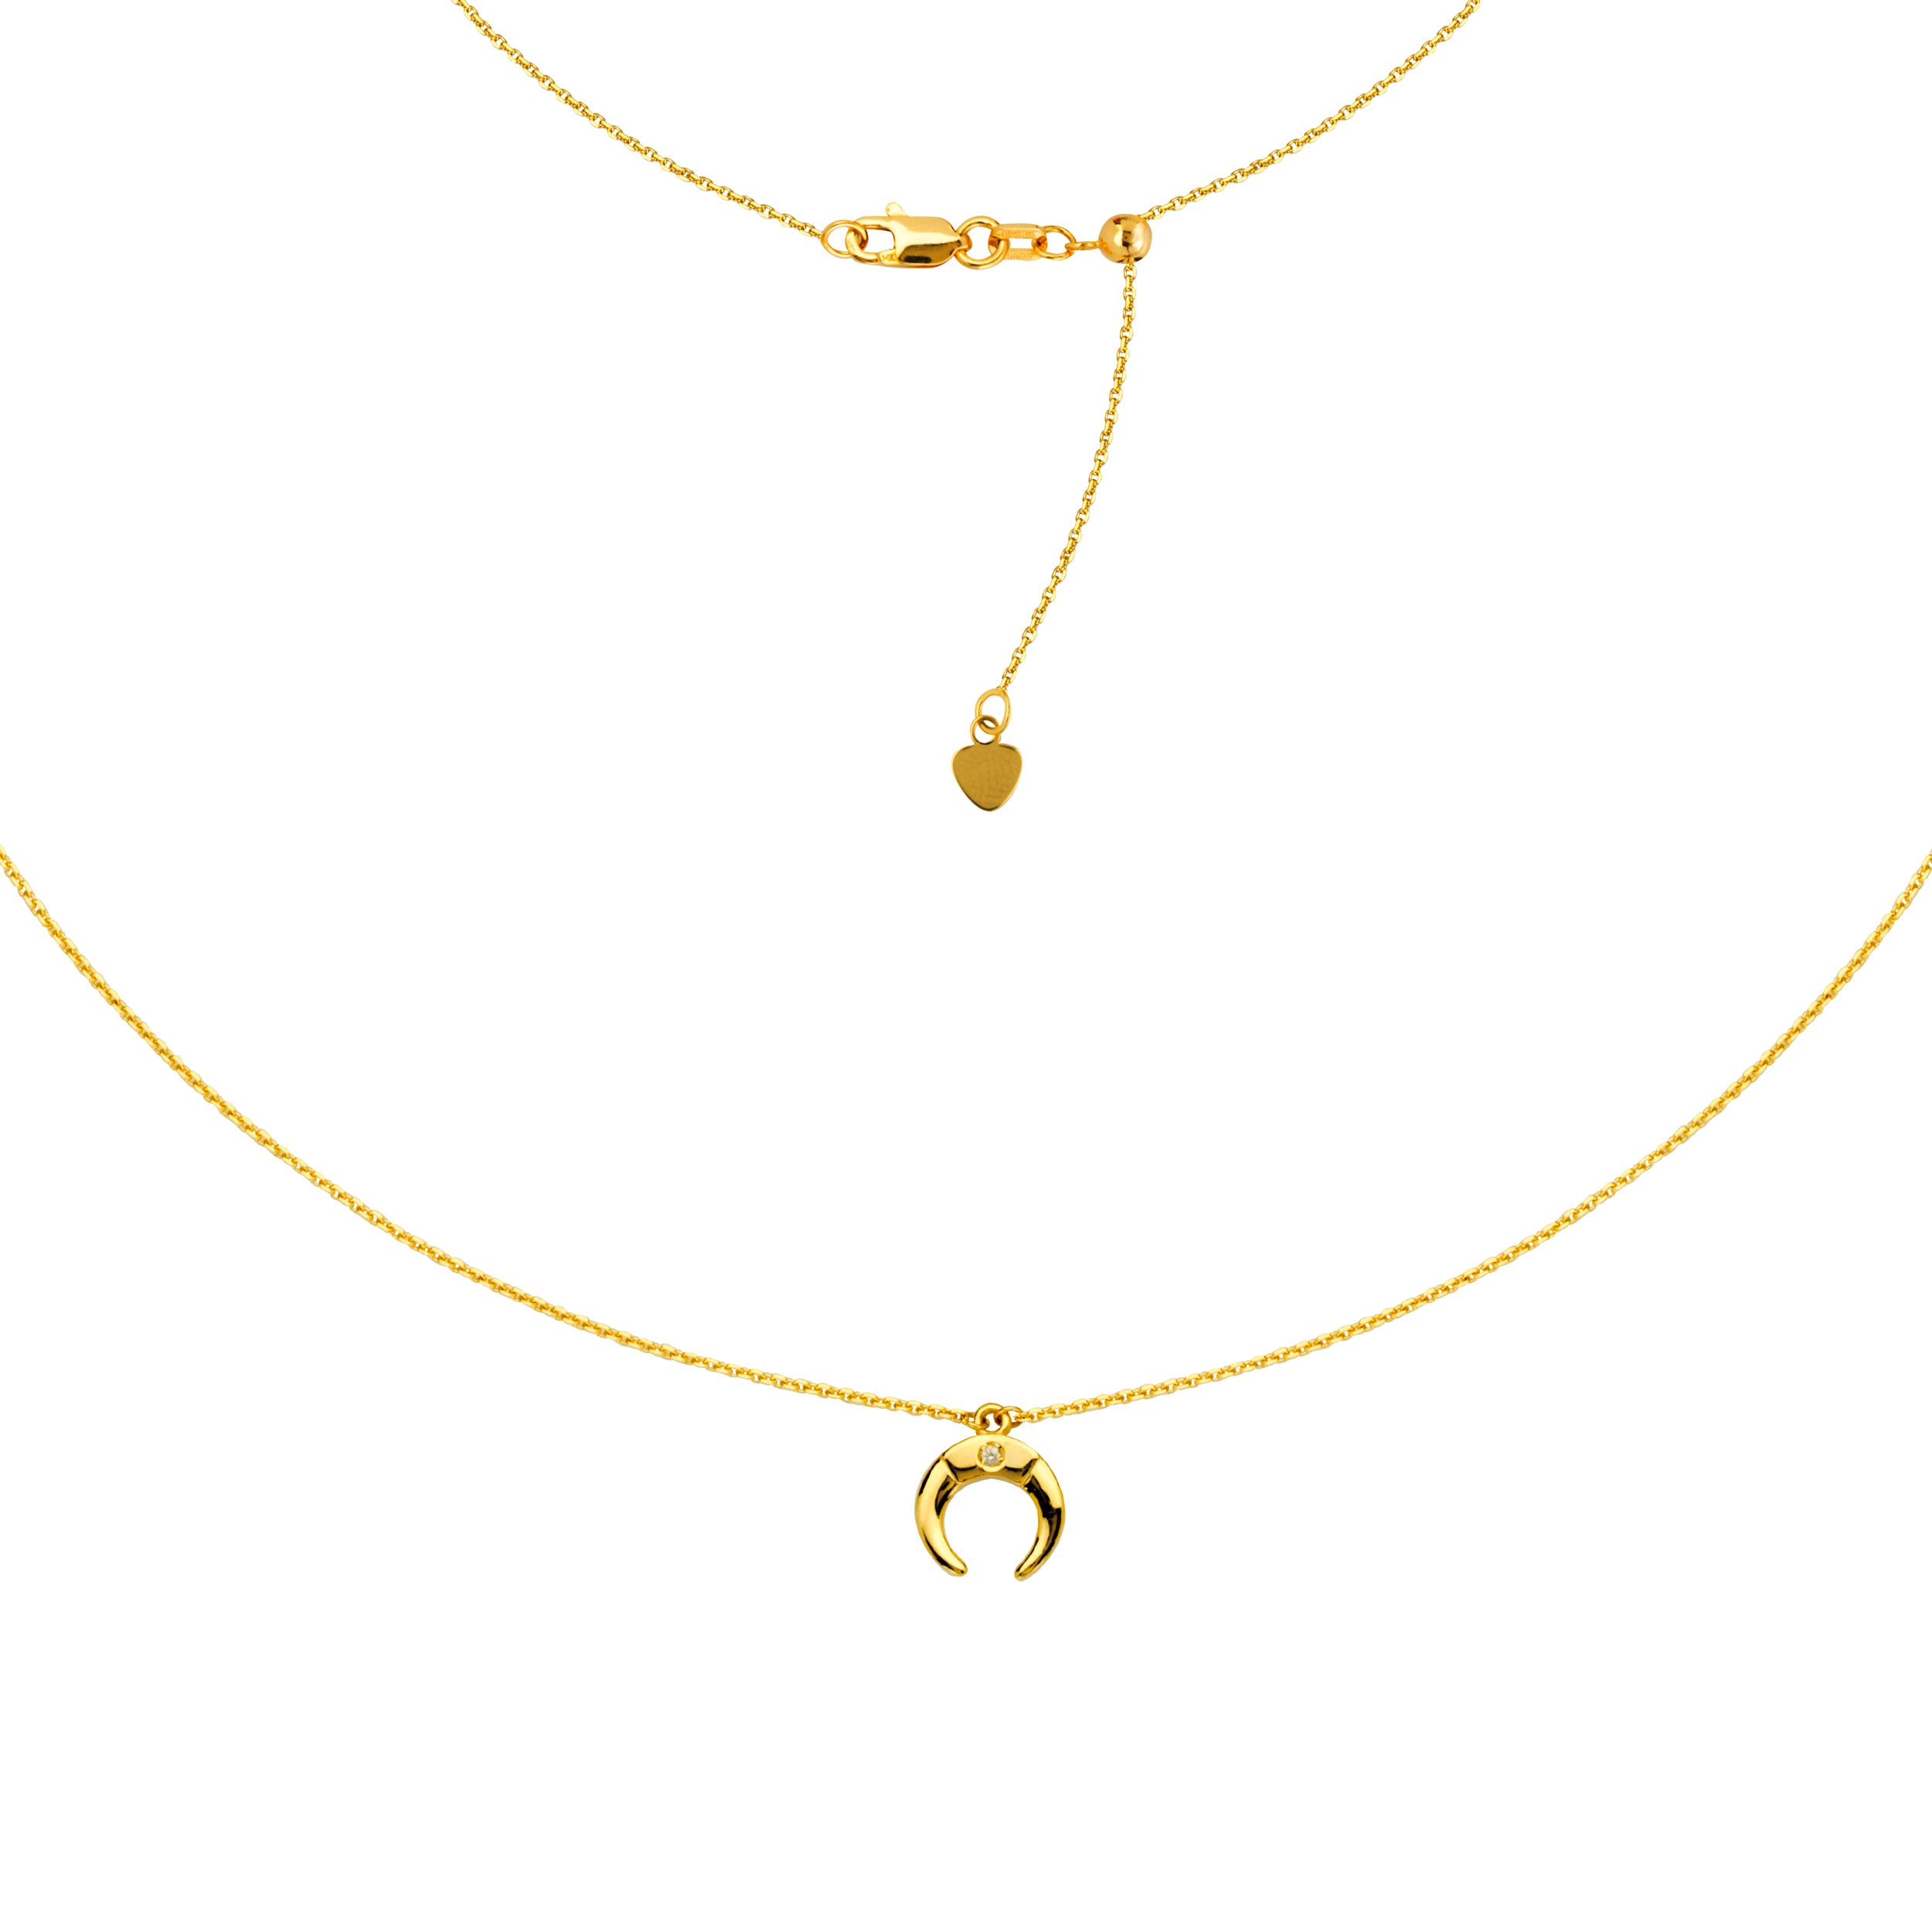 Half Moon Choker 14k Yellow Gold Necklace, 16" Adjustable fine designer jewelry for men and women